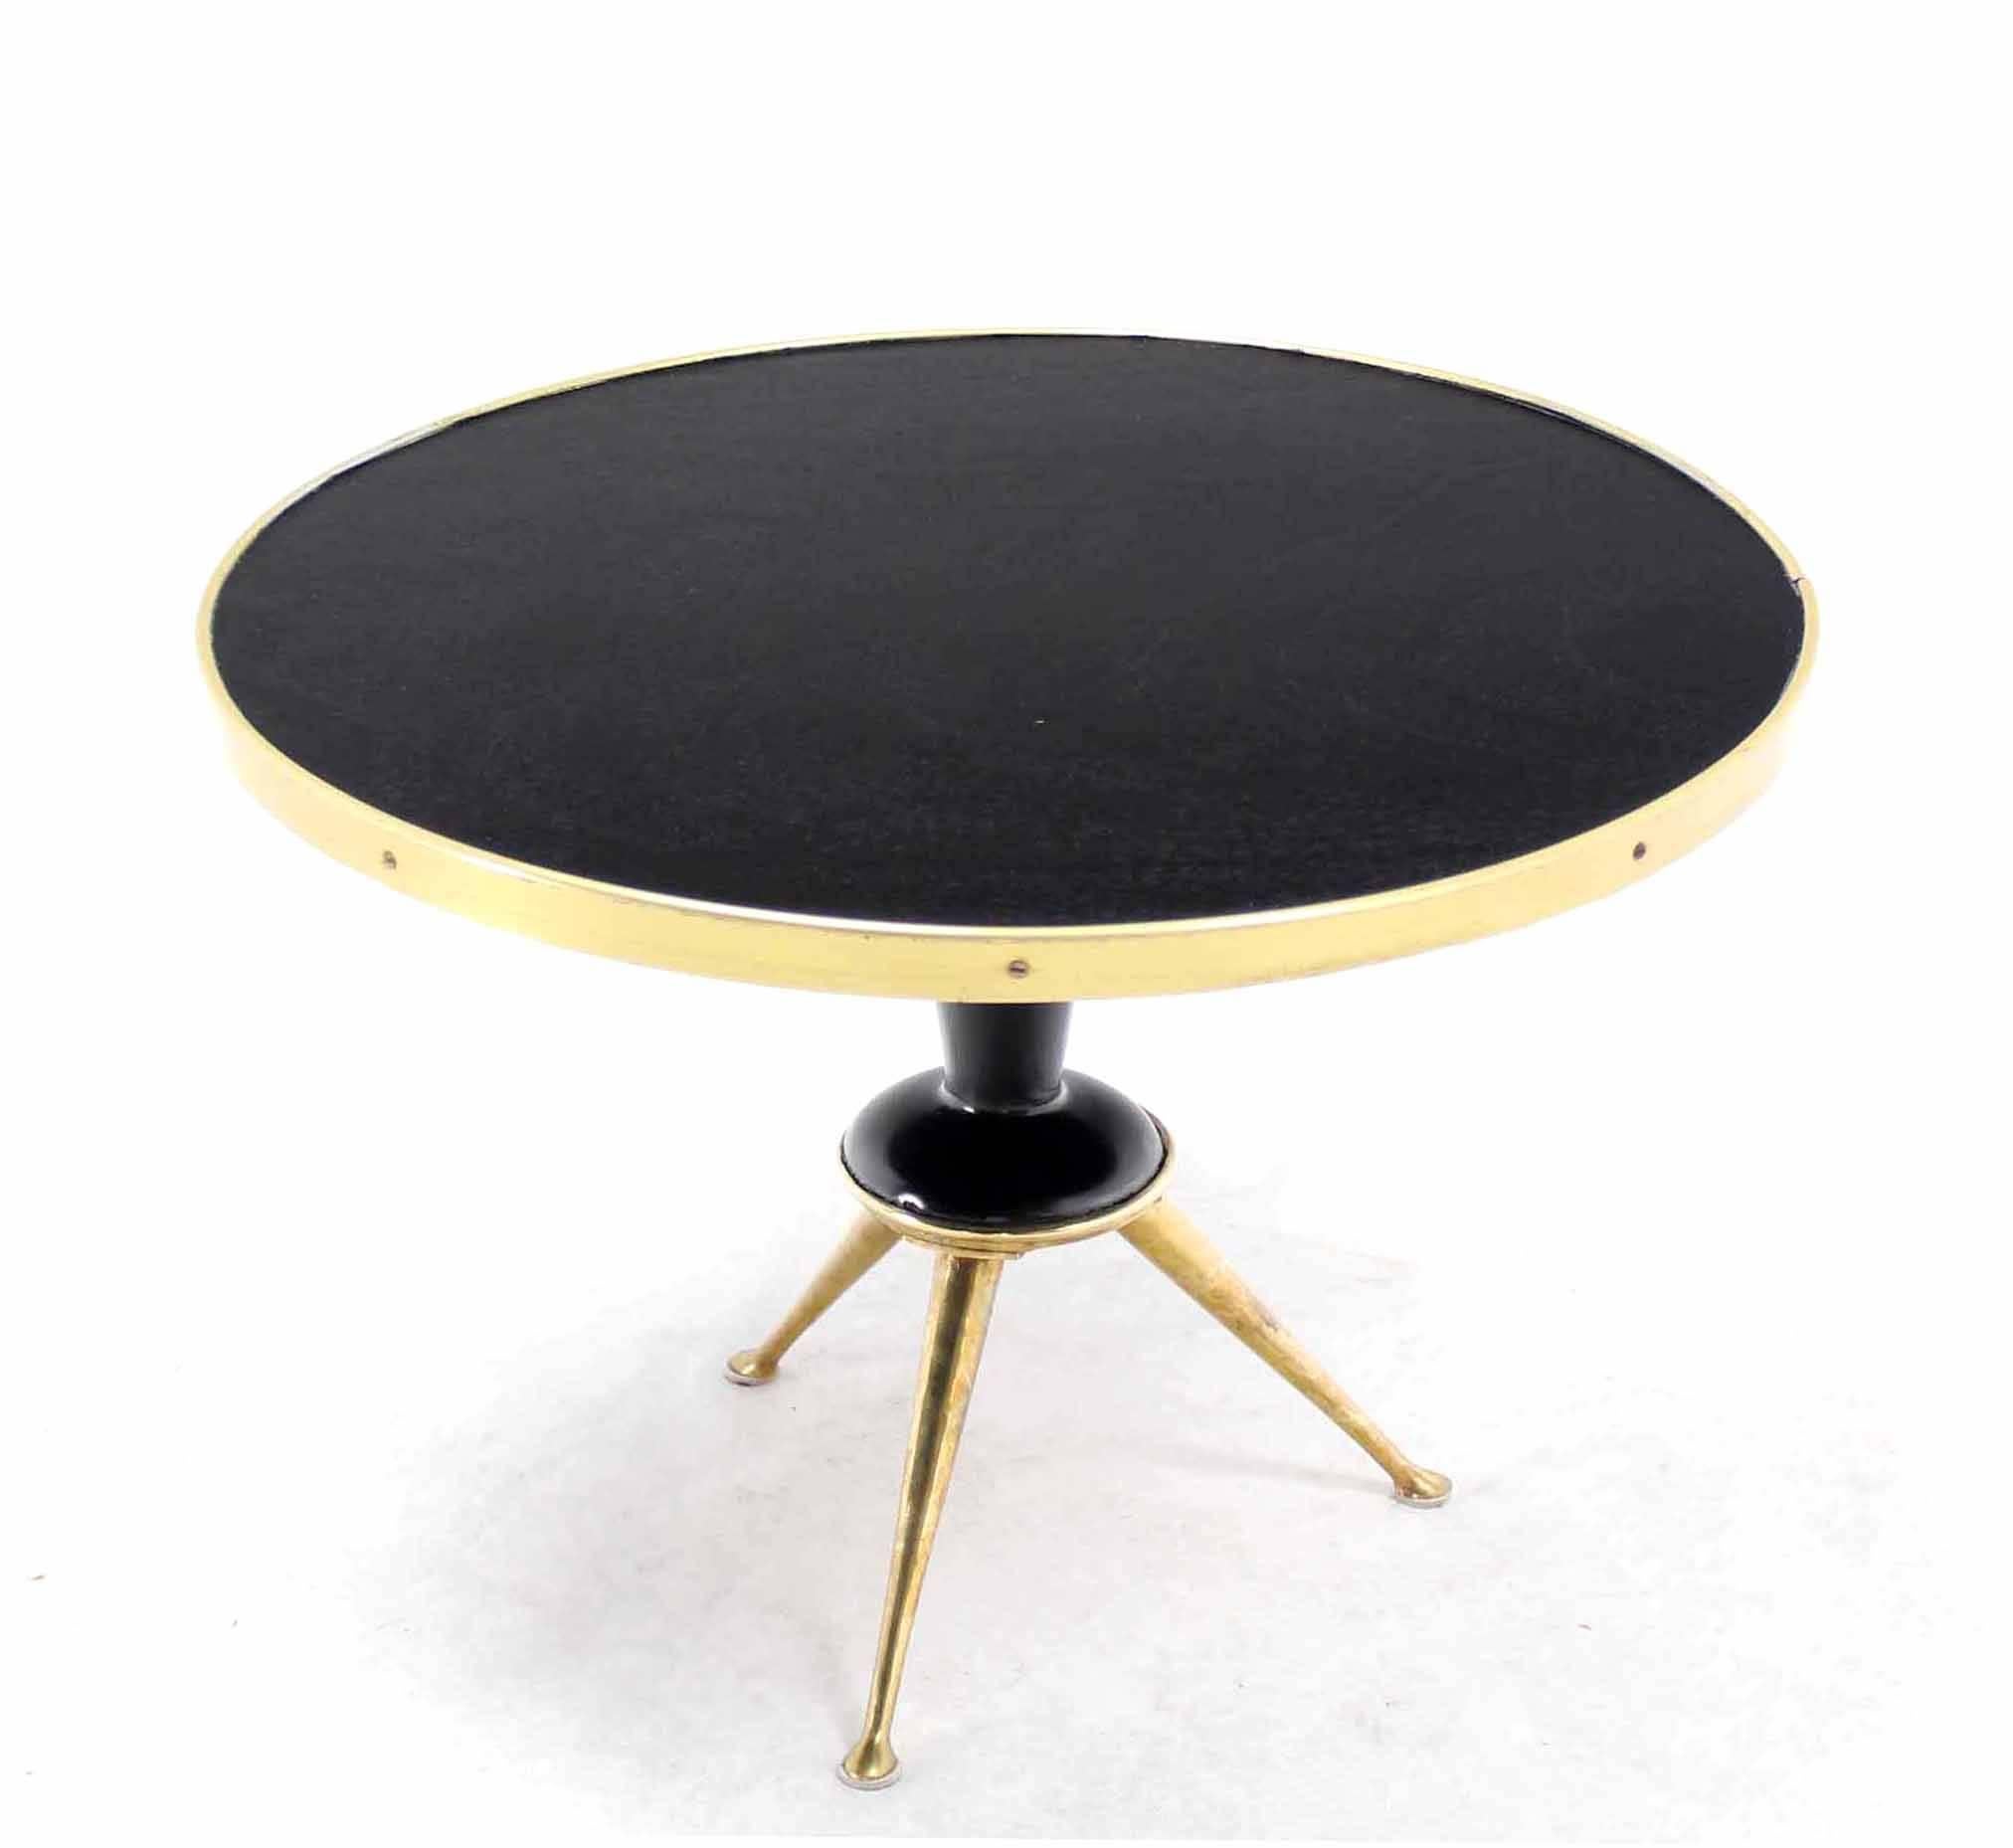 Nice Italian round side coffee table or stand on brass trip leg tripod base. Nice turned wood base element.